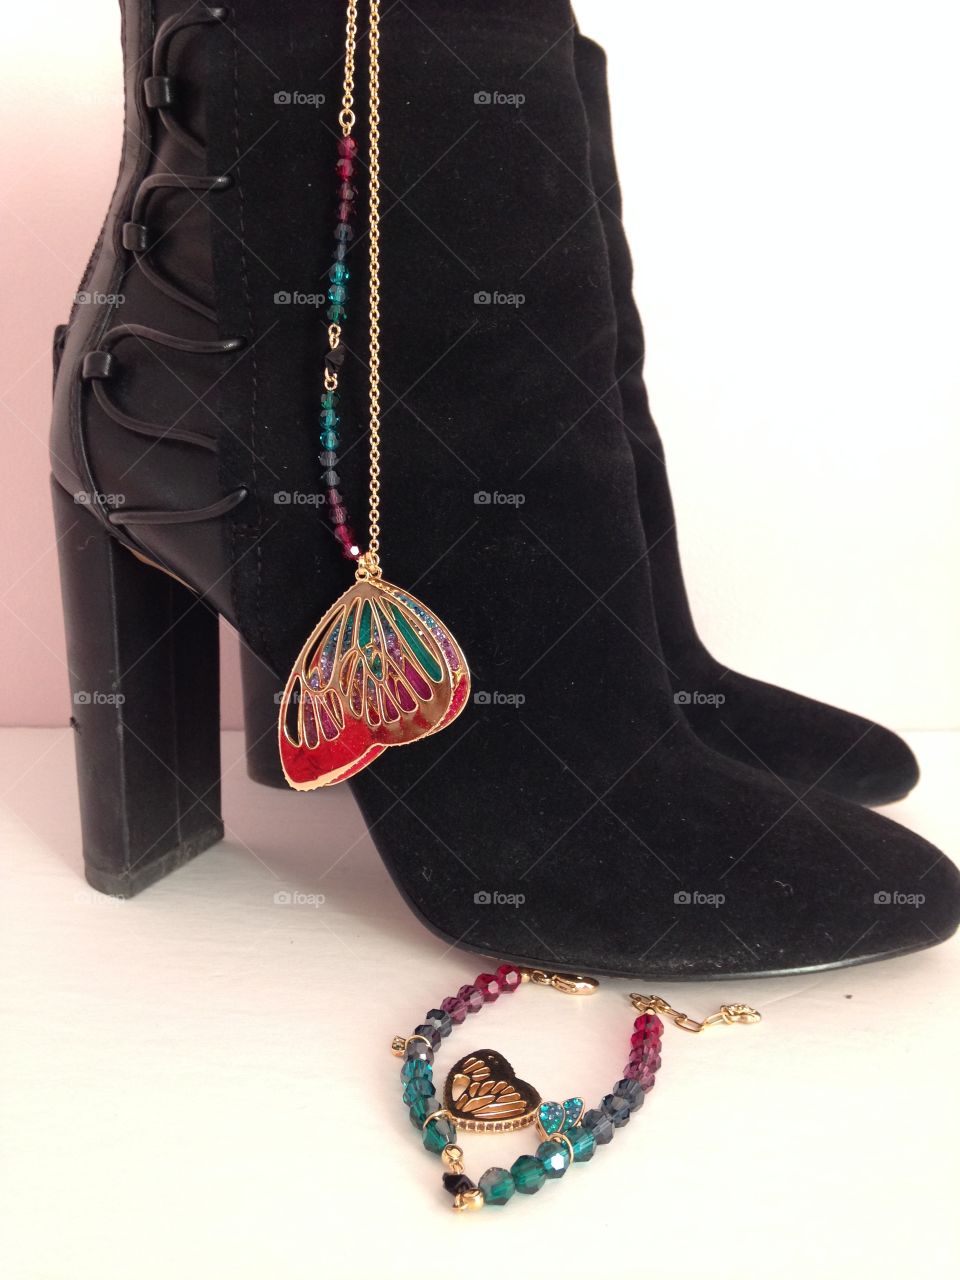 Boots and jewelry